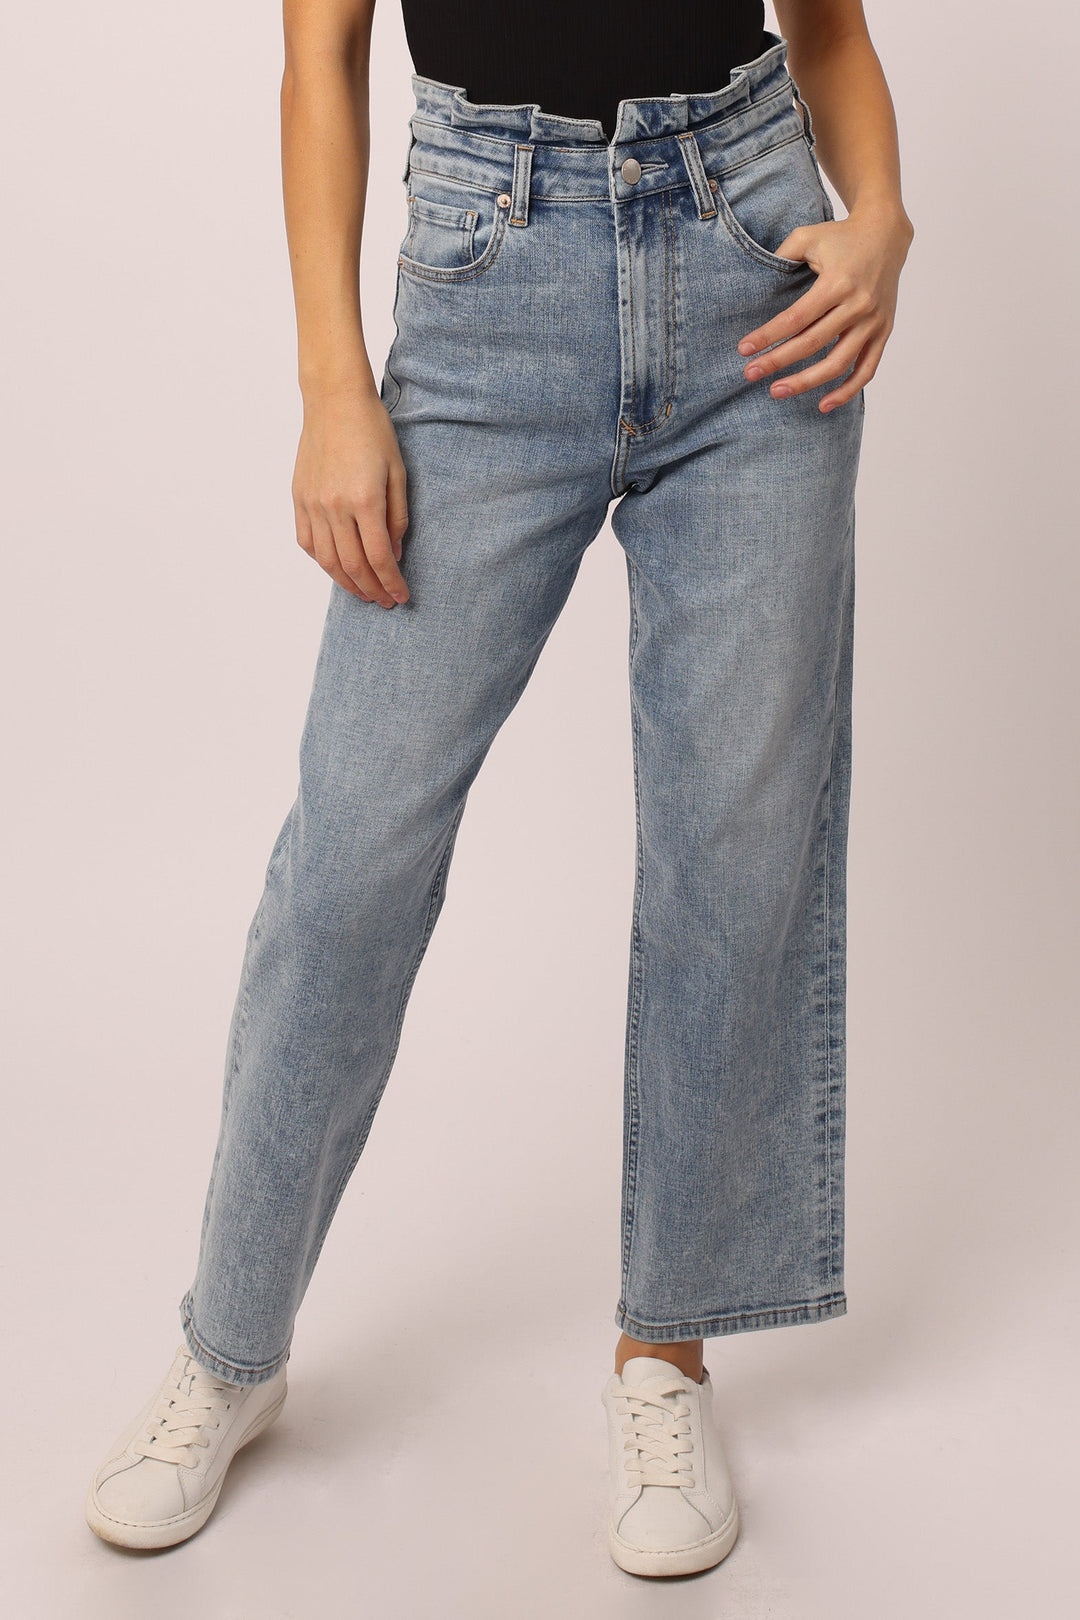 image of a female model wearing a 90S ULTRA HIGH RISE ANKLE STRAIGHT JEANS MIDDLETOWN DEAR JOHN DENIM 